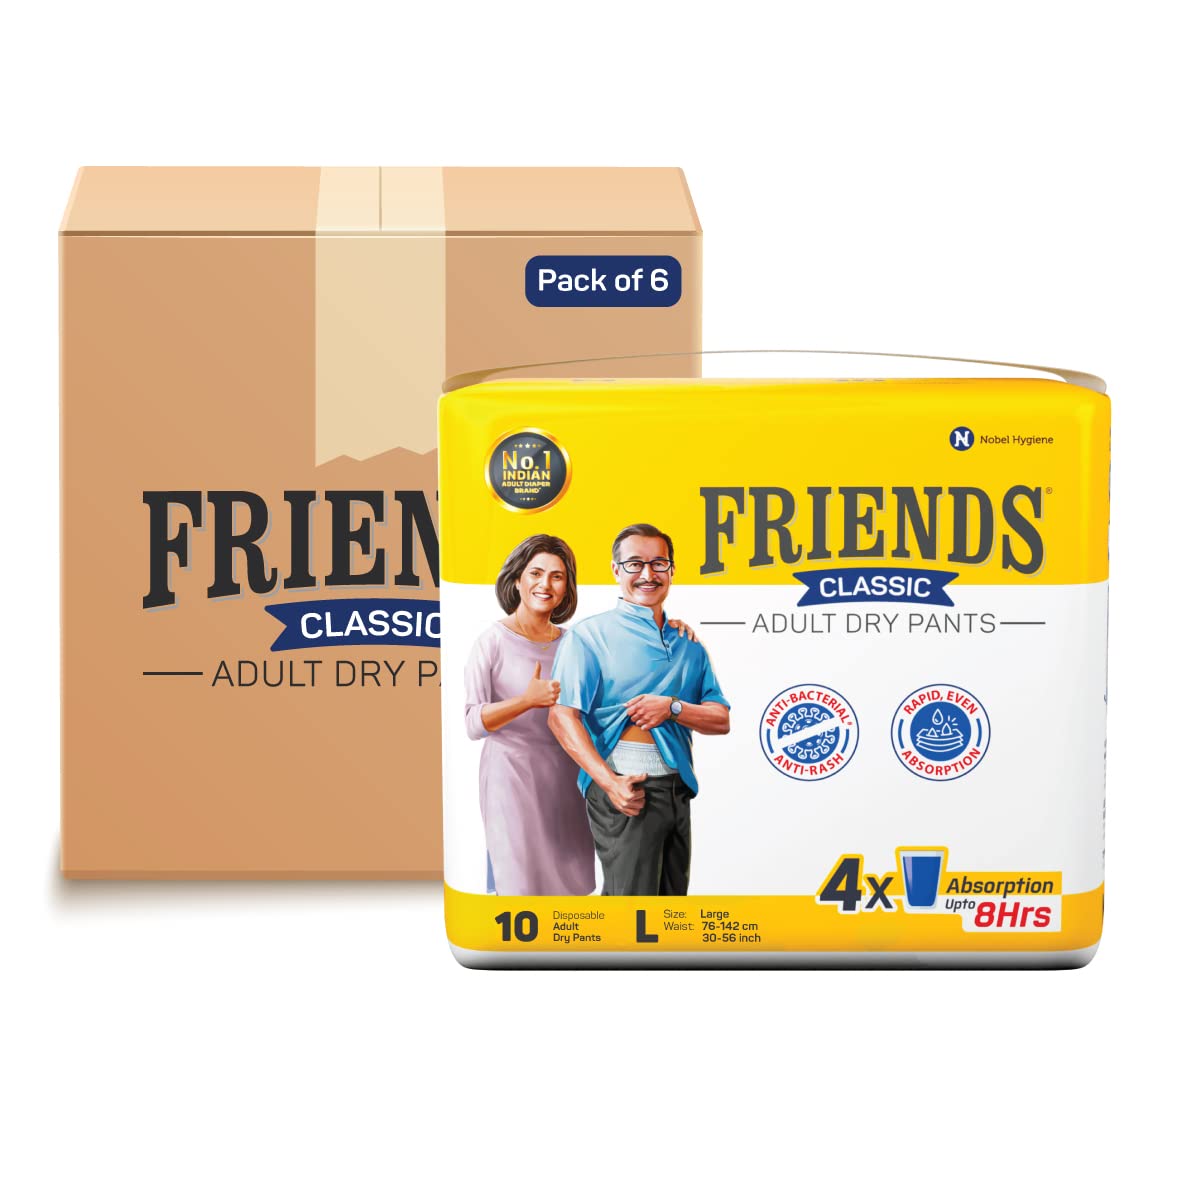 FRIENDS CLASSIC ADULT DIAPERS PANTS STYLE - WITH ODOUR LOCK AND ANTI-BACTERIAL ABSORBENT CORE- WAIST SIZE 30-56 INCH ; 76-142CM (L SIZE)